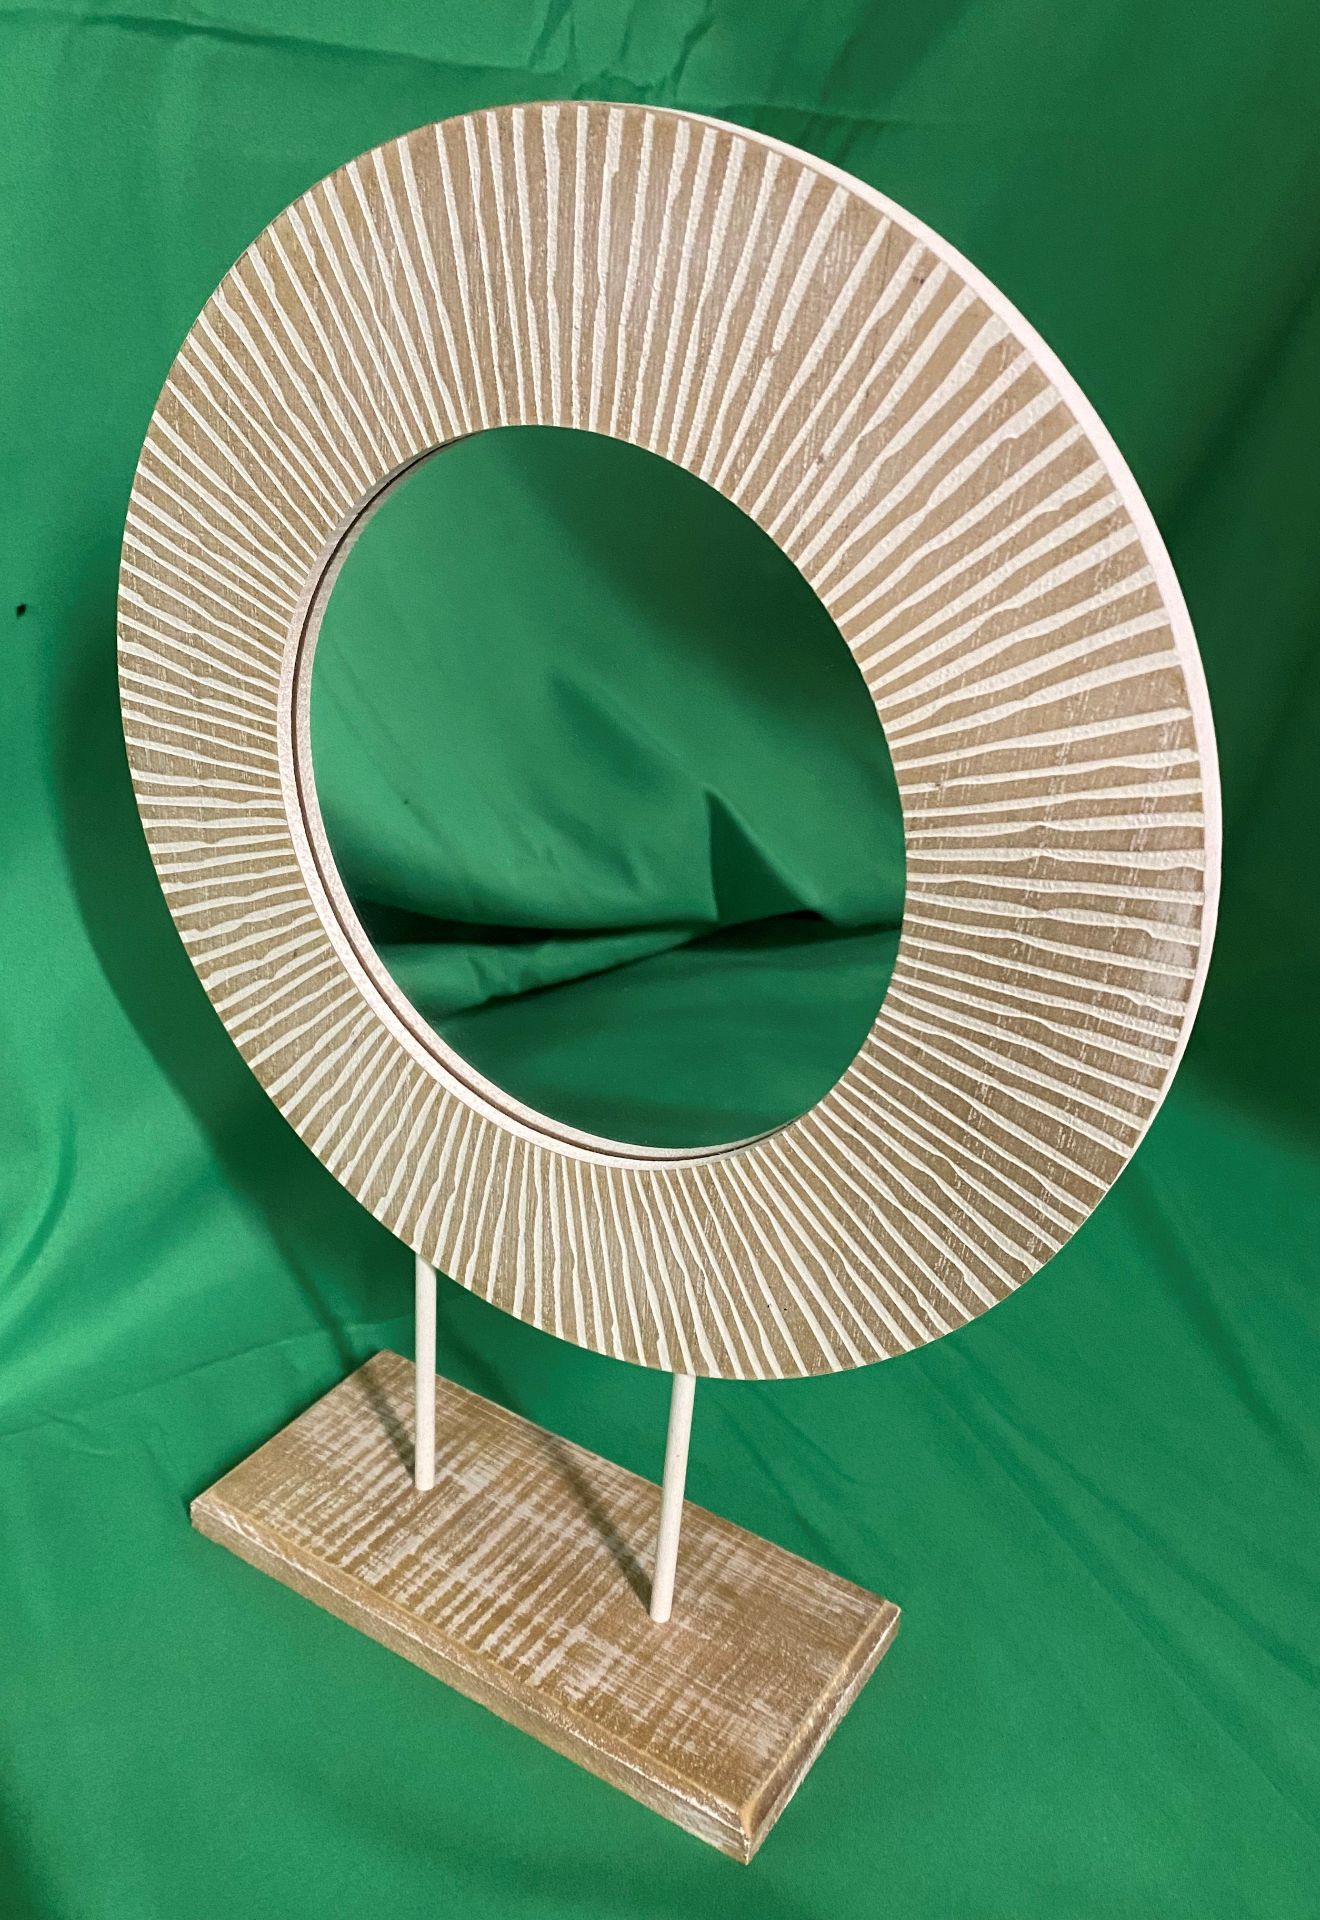 20 x Wooden Mirror On Stand